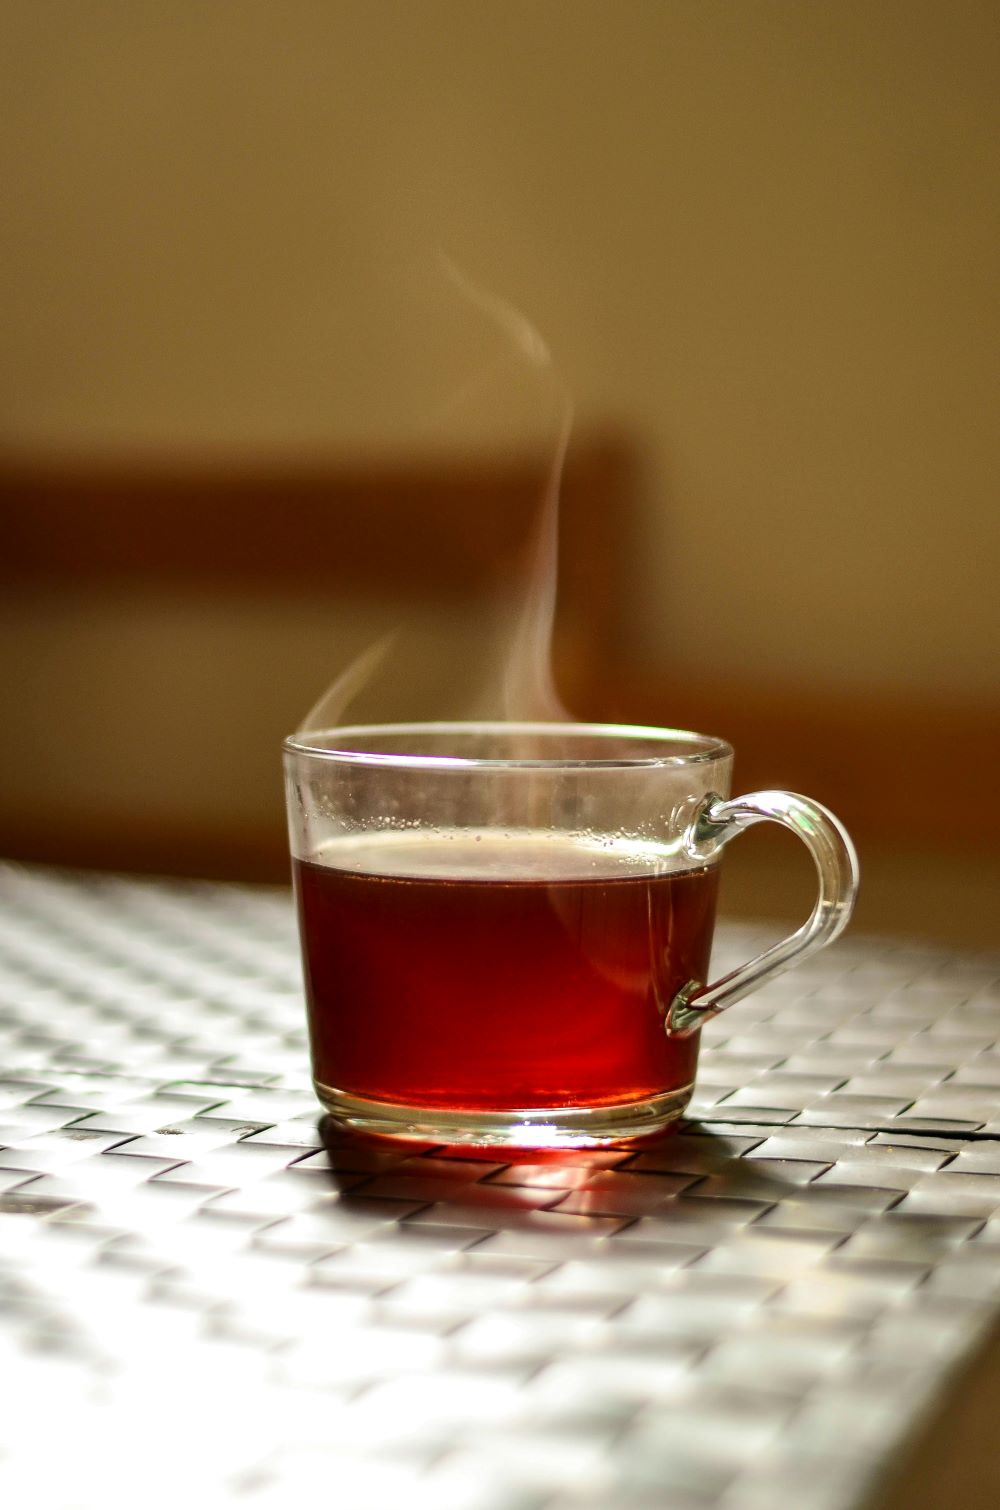 In Terms of Tea, the Health Benefits Are Many